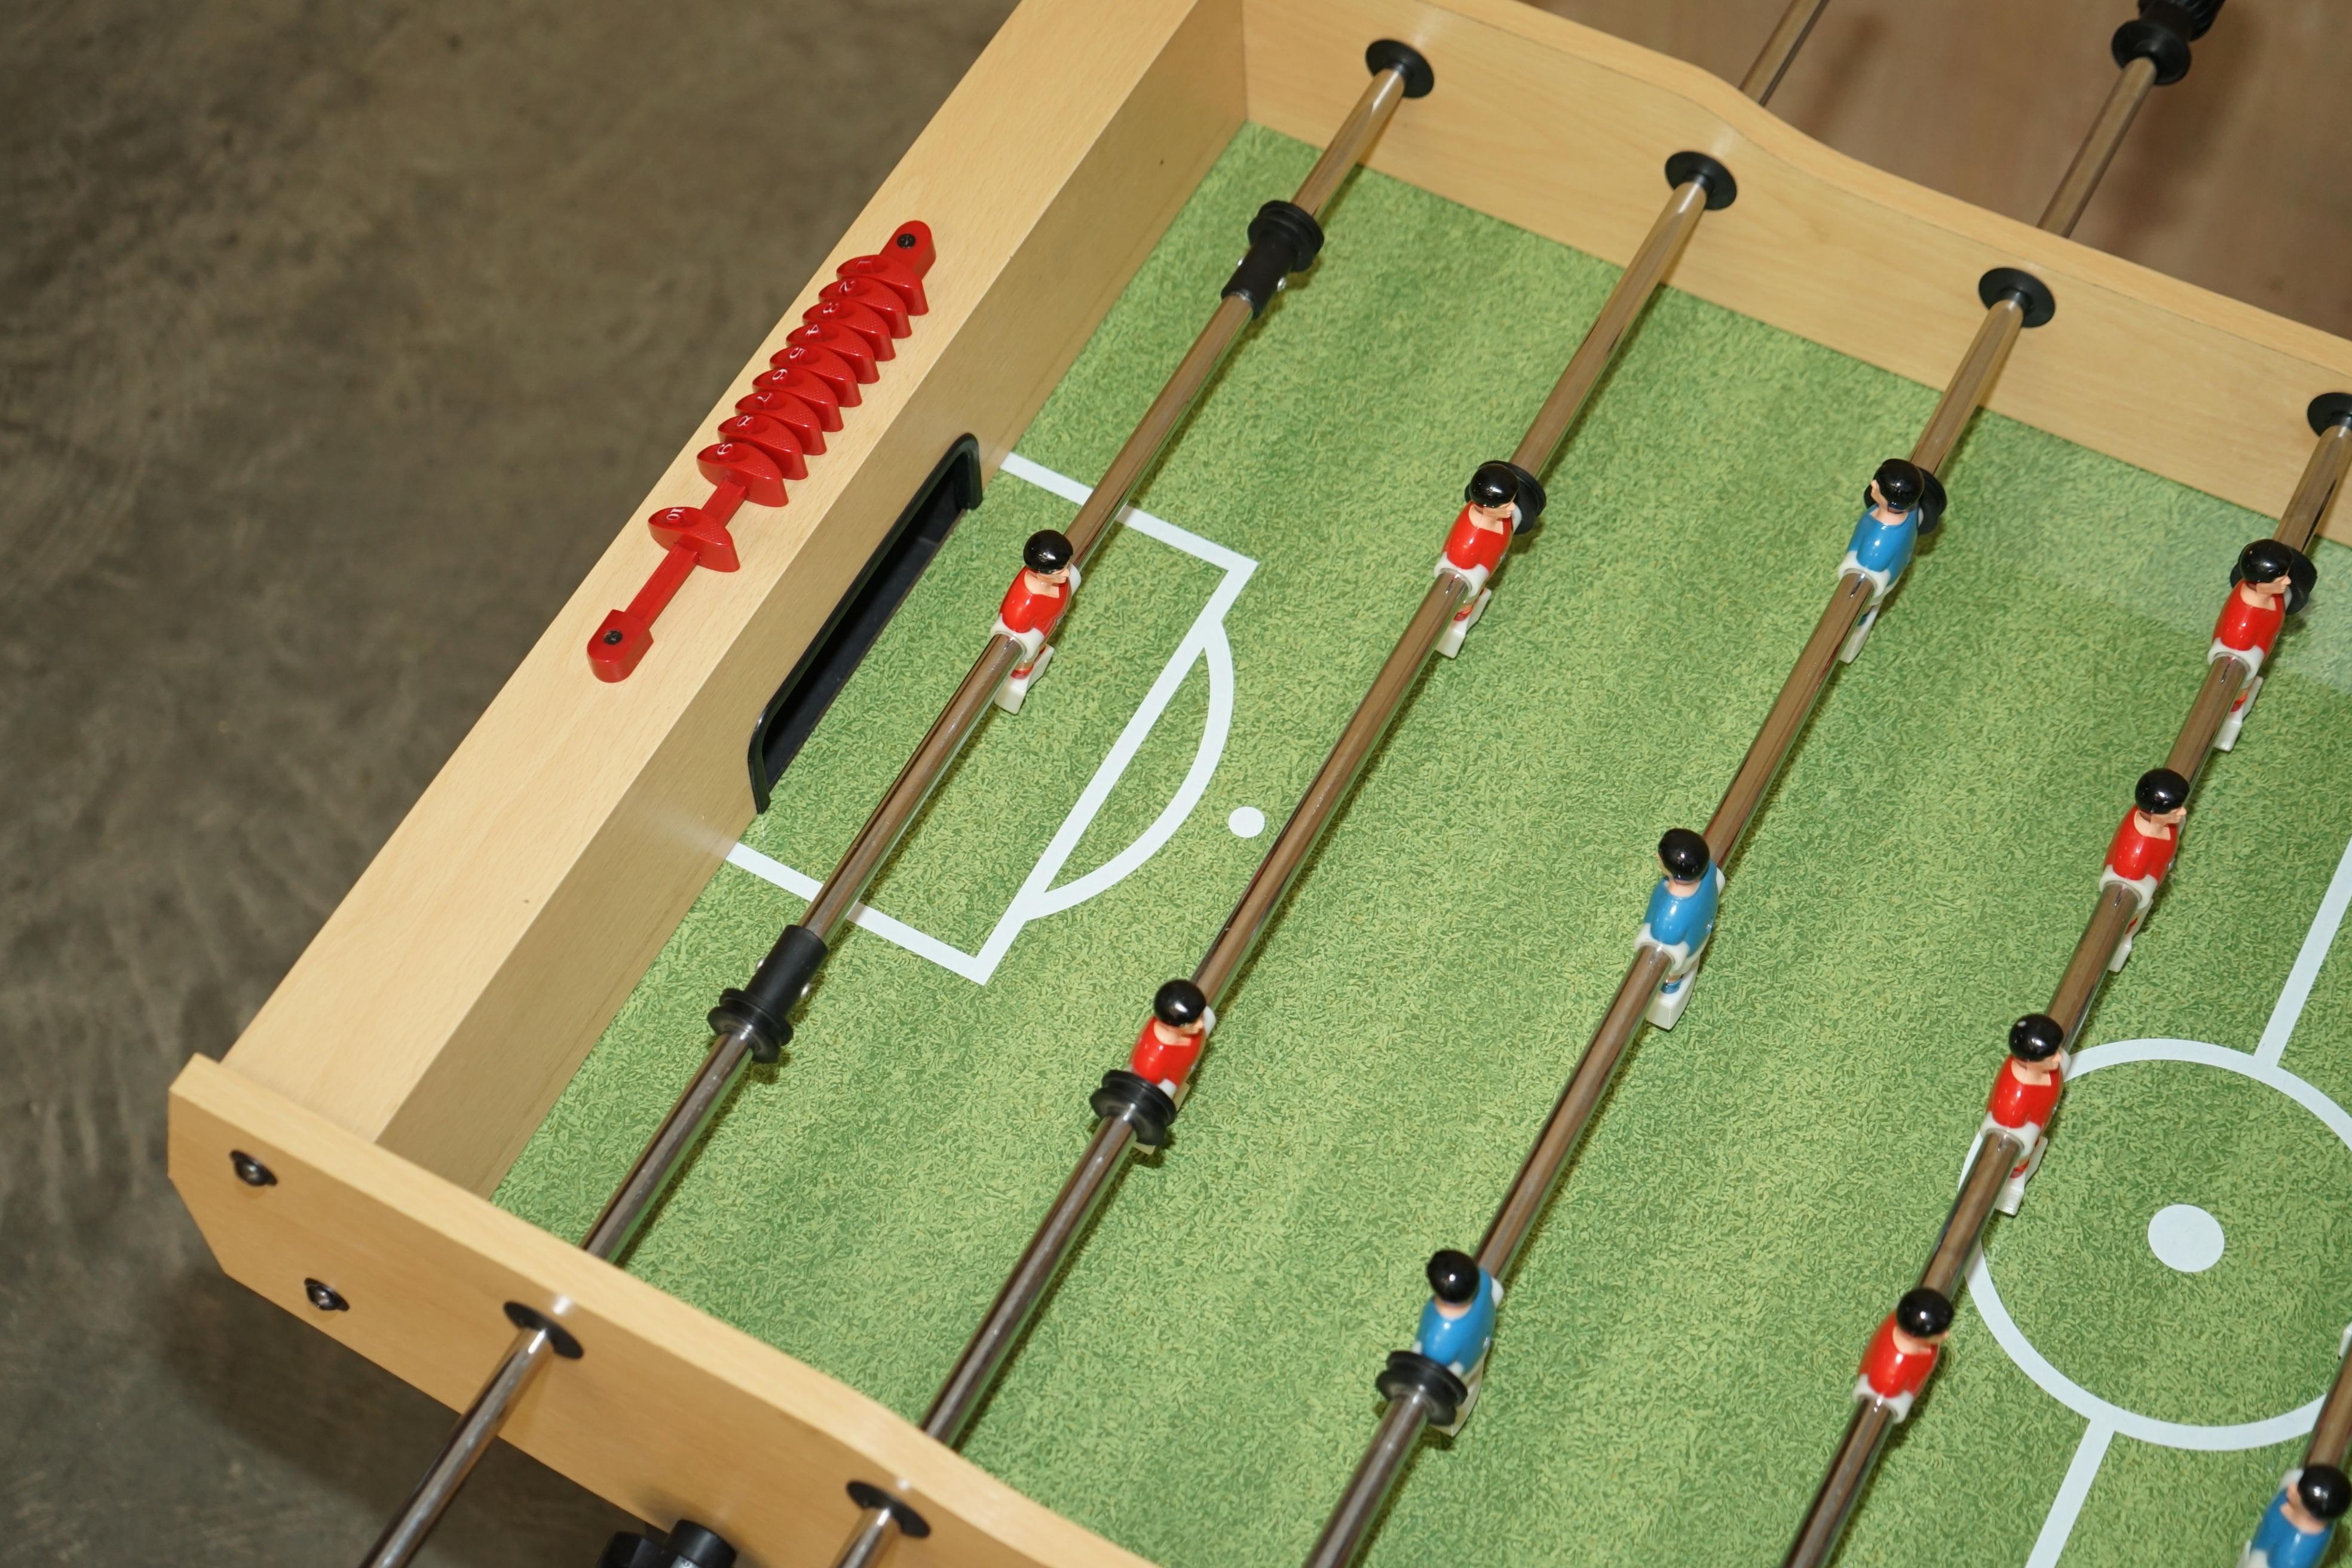 Hand-Crafted Table Football / Foosball That Folds Away for Ease of Storage Keep the Kids Busy